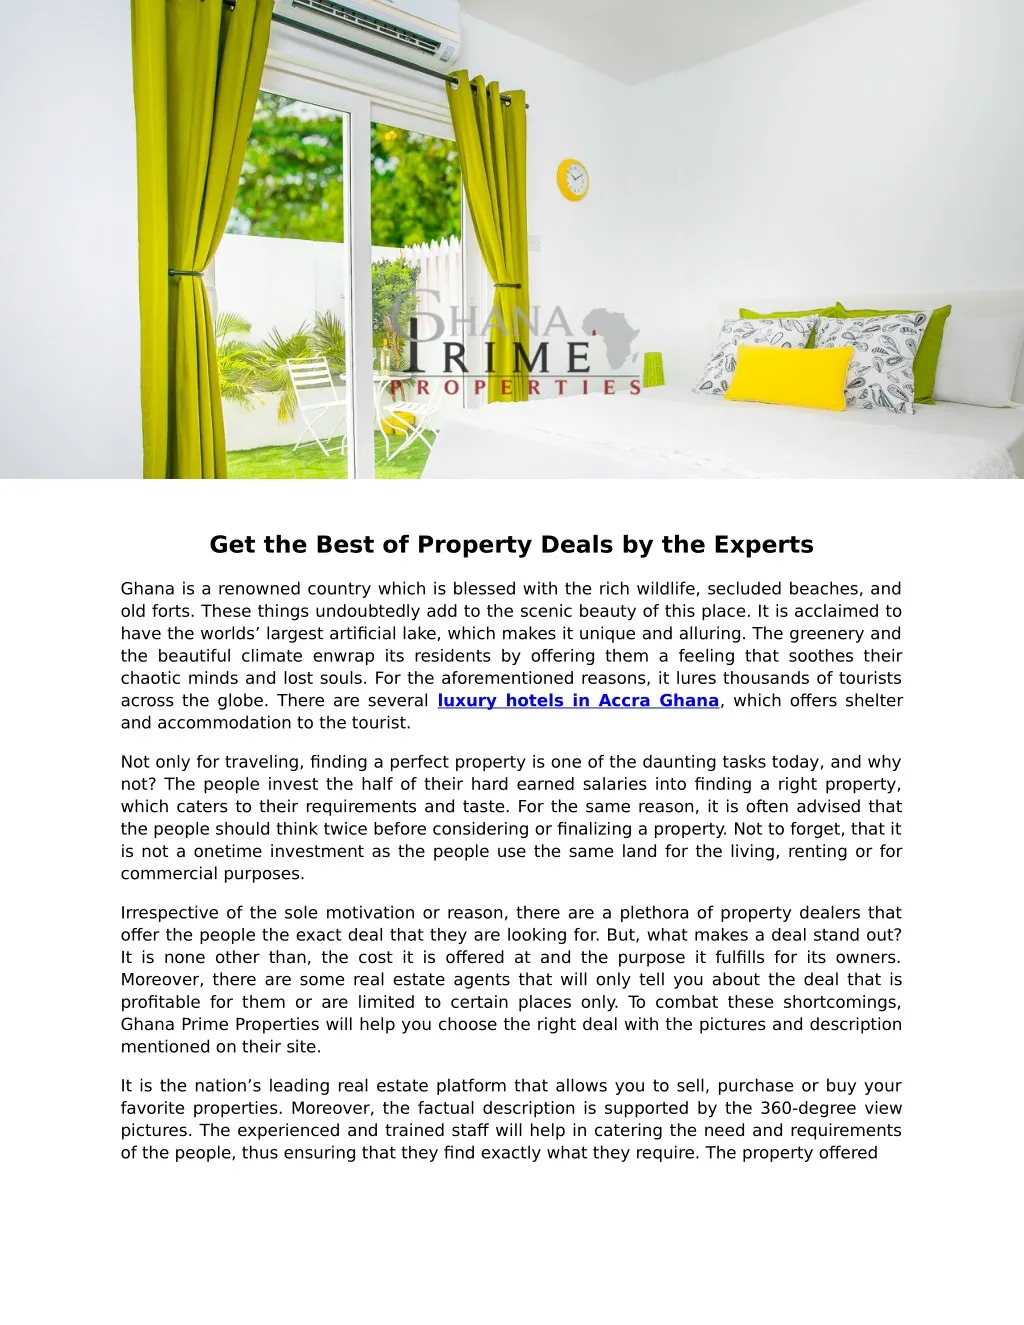 get the best of property deals by the experts